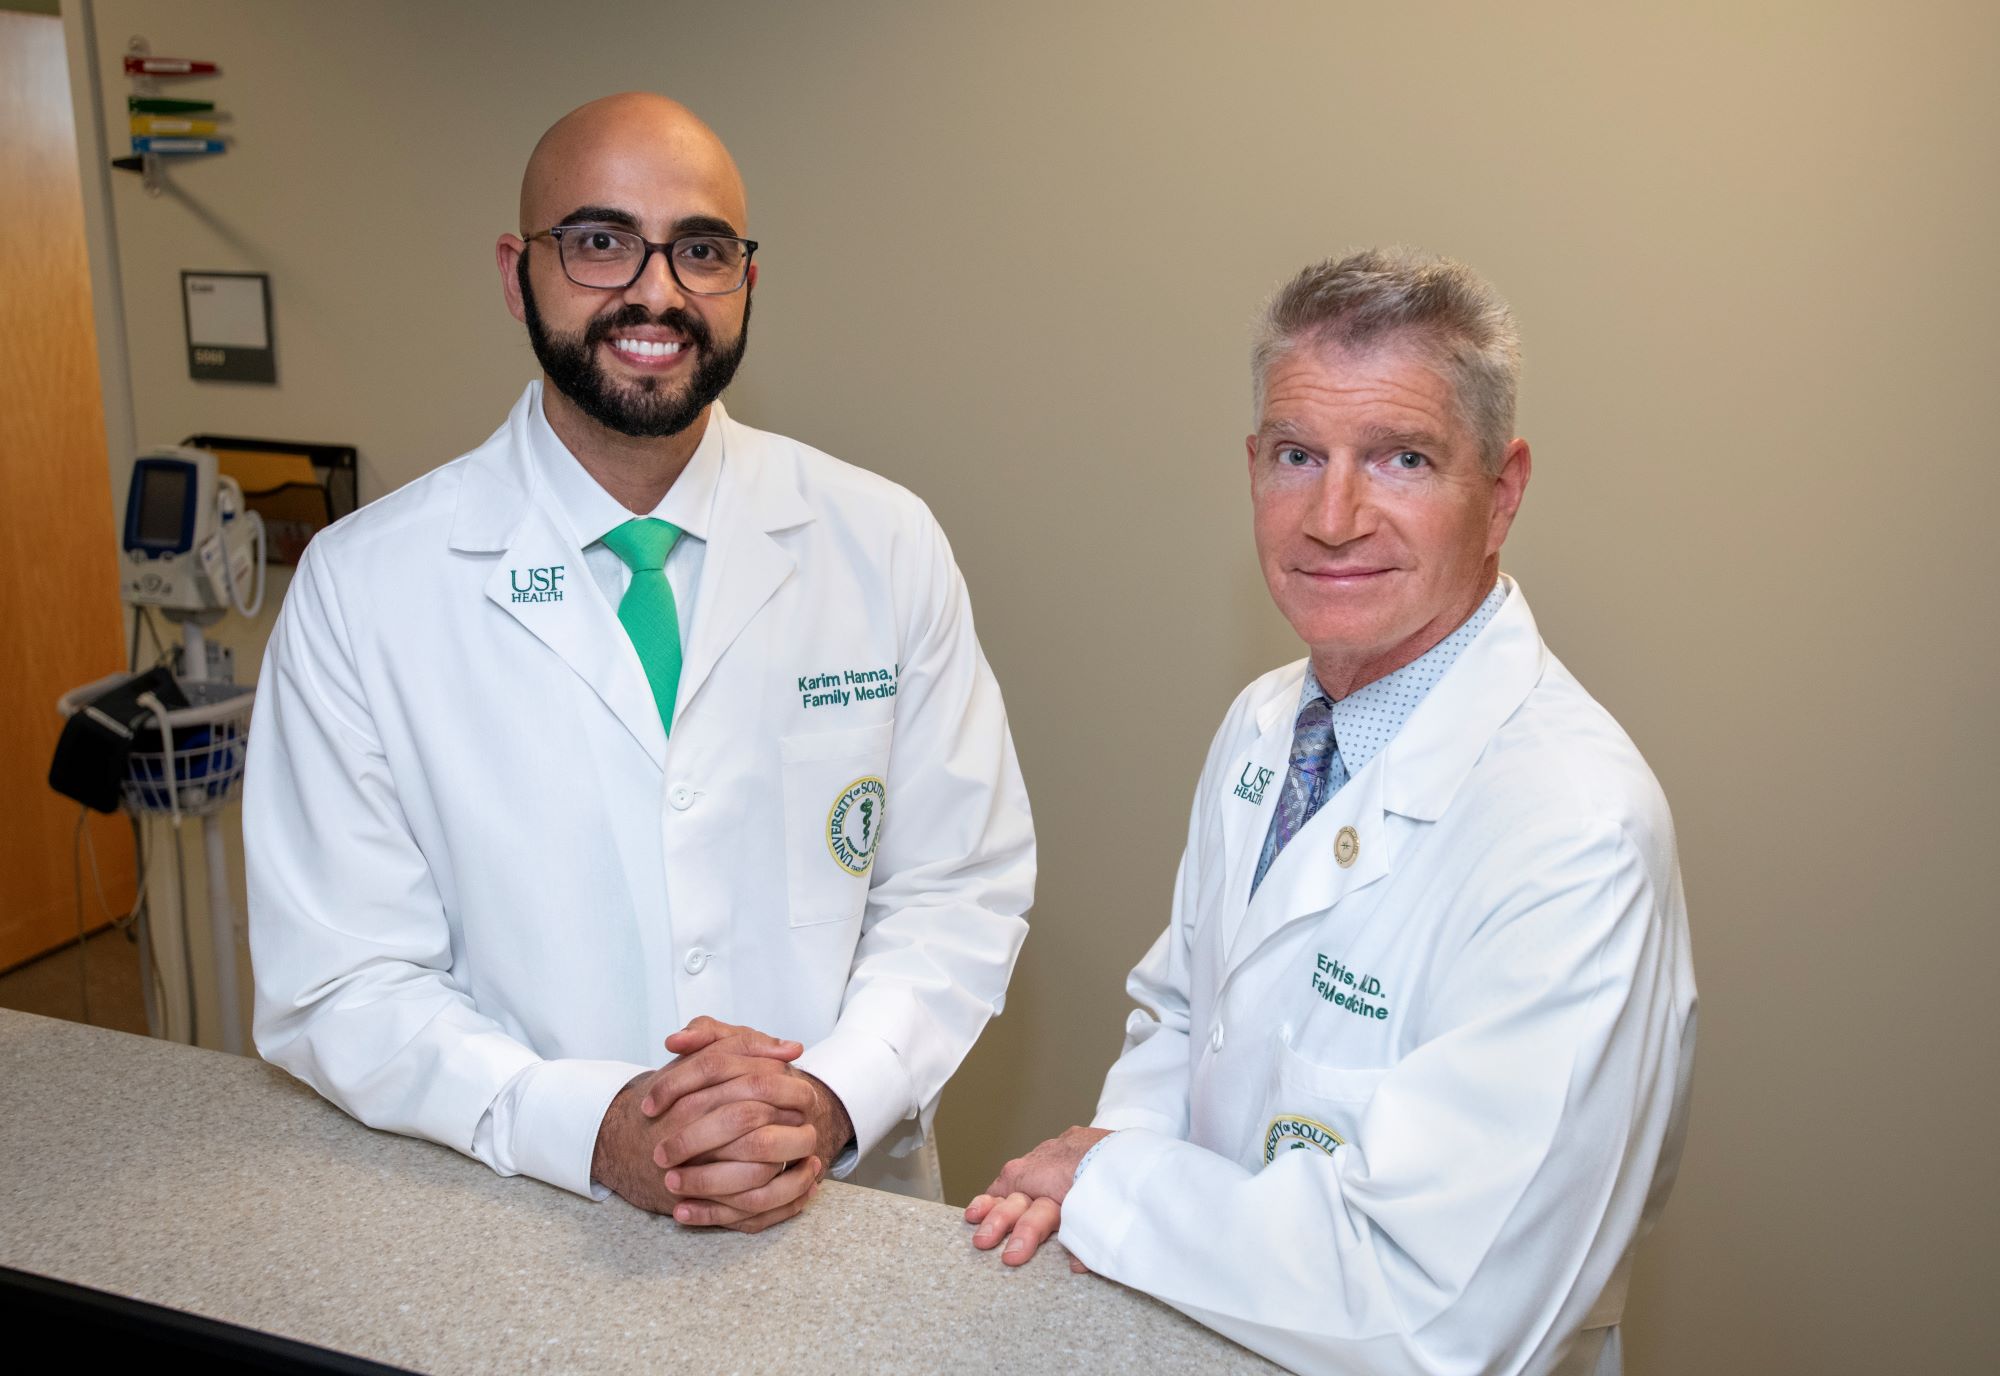 USF Health expands primary care training with new Family Medicine residency program